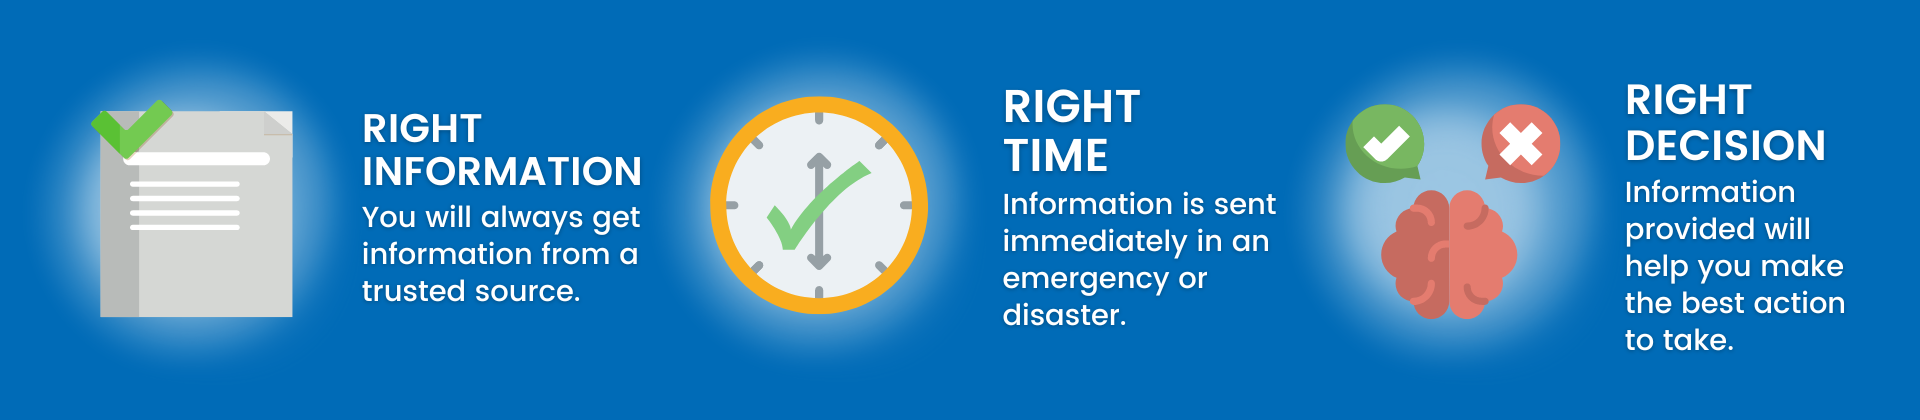 RIGHT INFORMATION. You will always get information from a trusted source. RIGHT TIME. Information is sent immediately in an emergency or disaster. RIGHT DECISION. Information provided will help you make the best action to take.